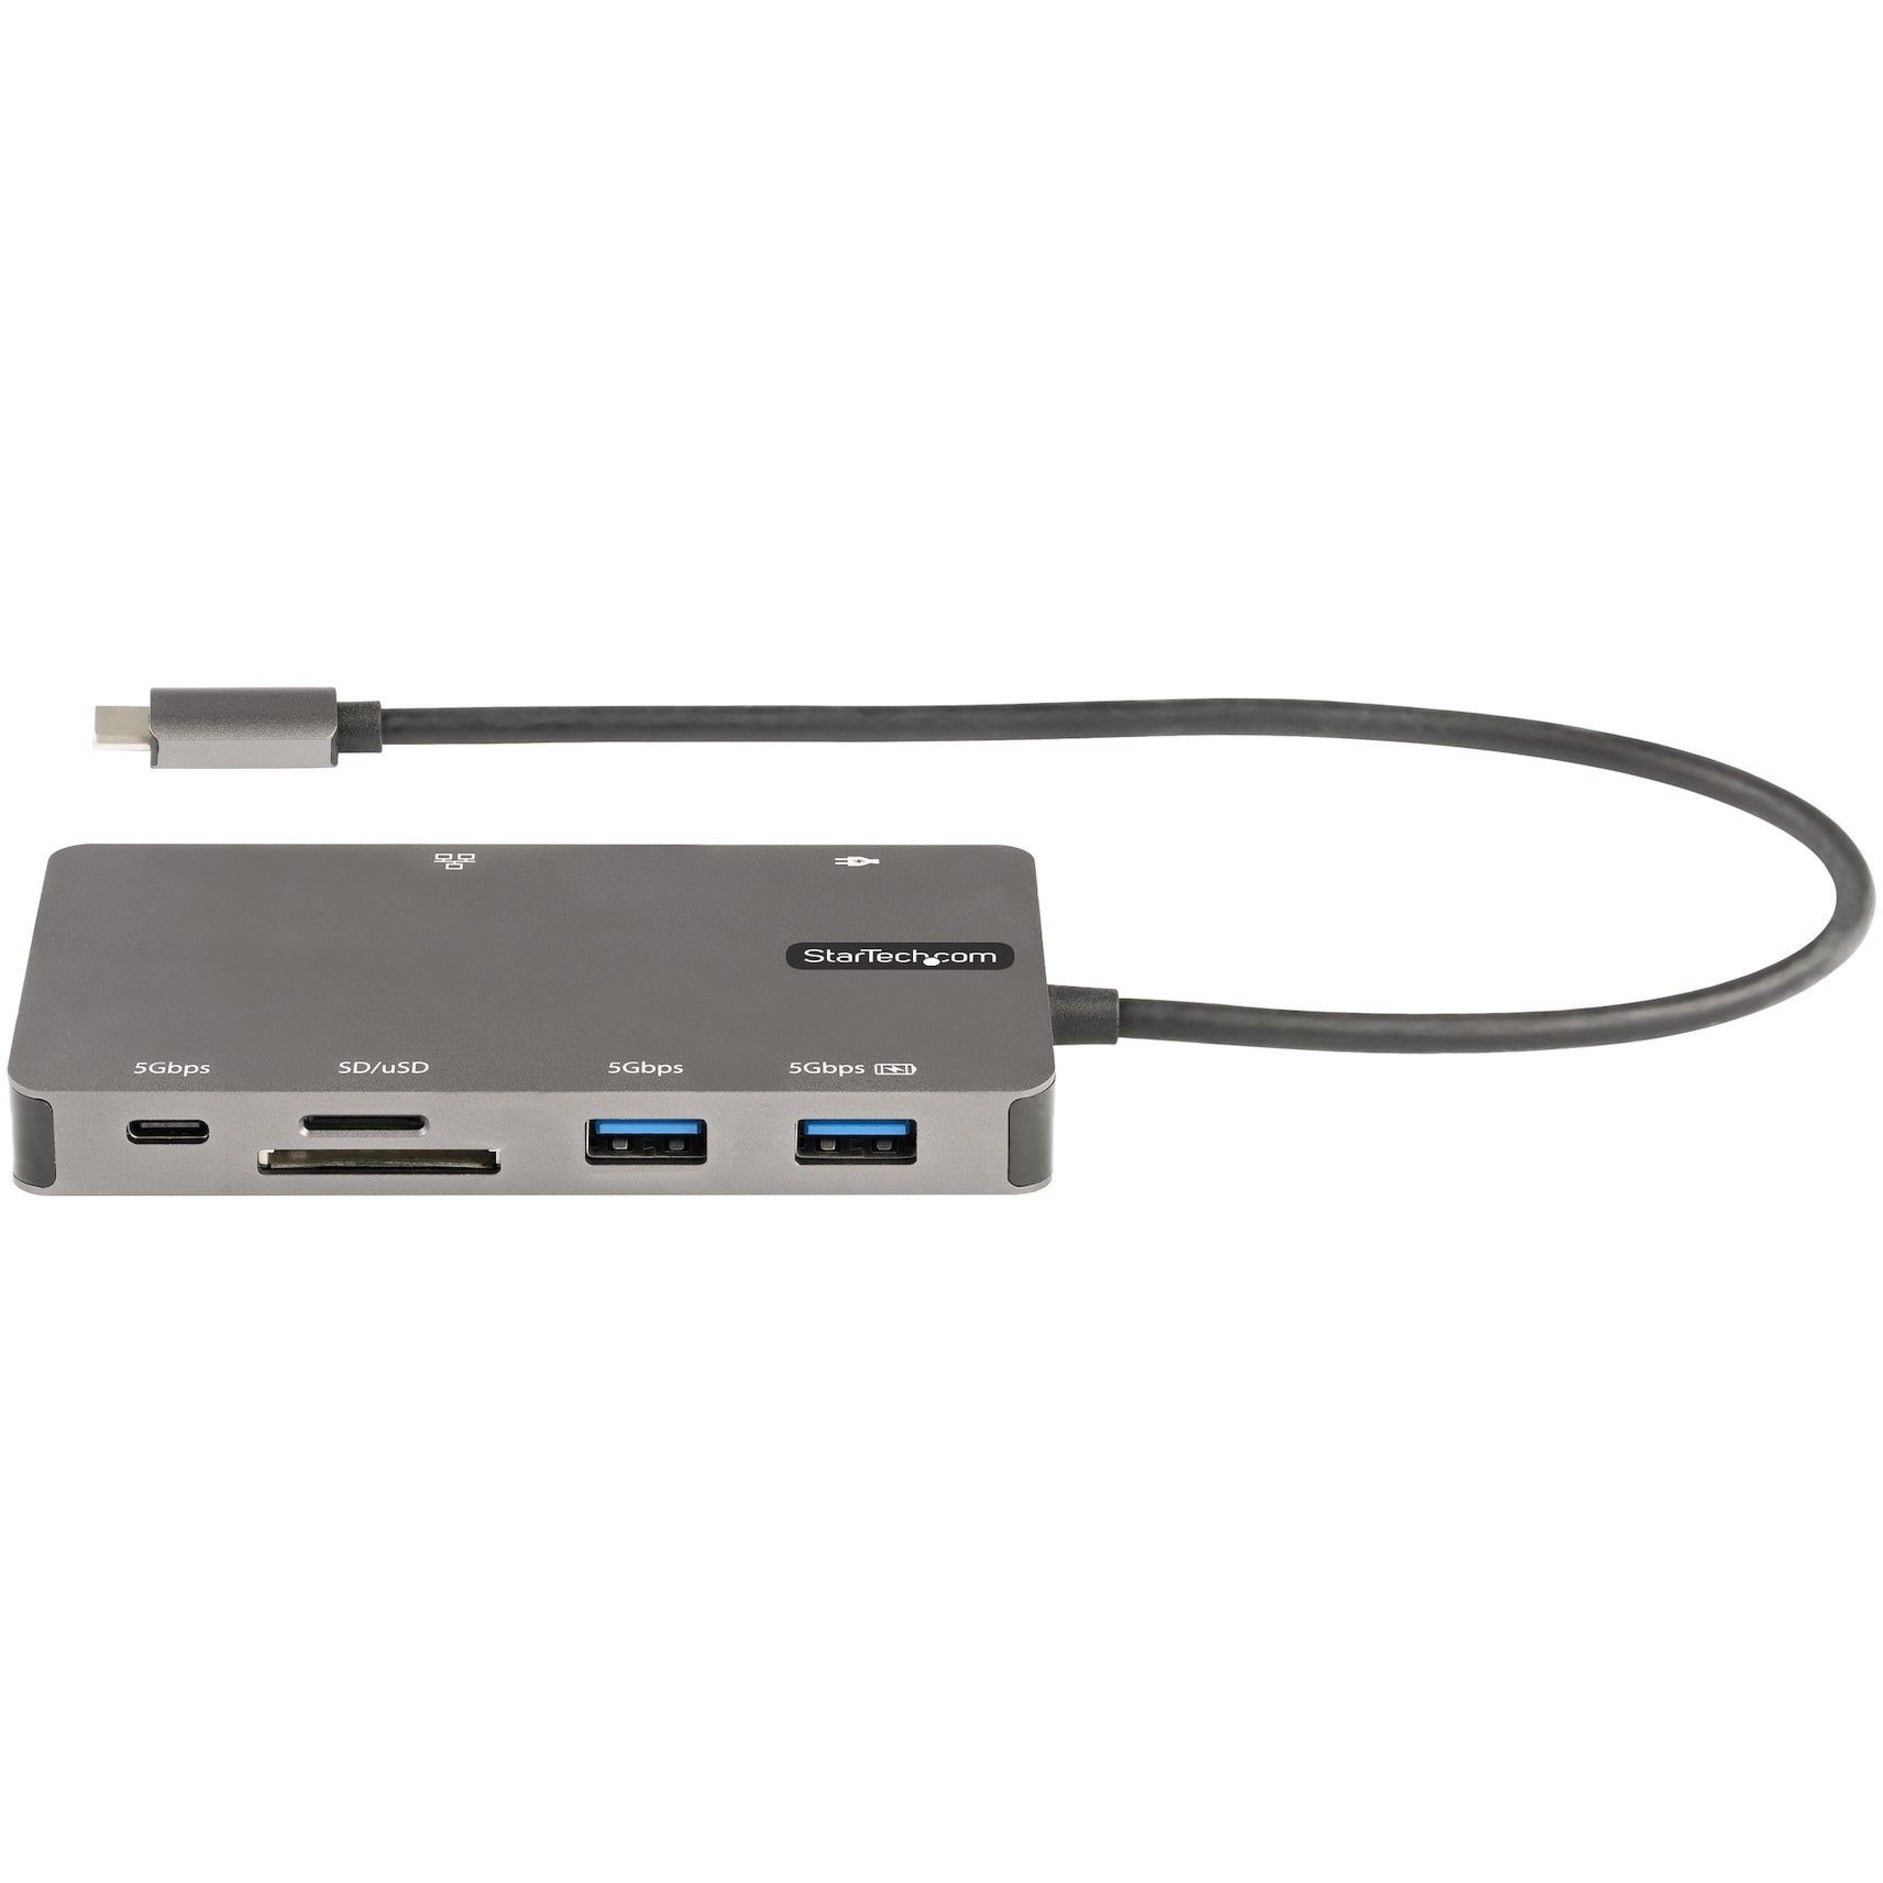 StarTech.com DKT30CHVSDPD USB C Multiport Adapter, HDMI 4K 30Hz or VGA, 5Gbps USB 3.0 Hub, 100W Power Delivery, SD/Micro SD, GbE